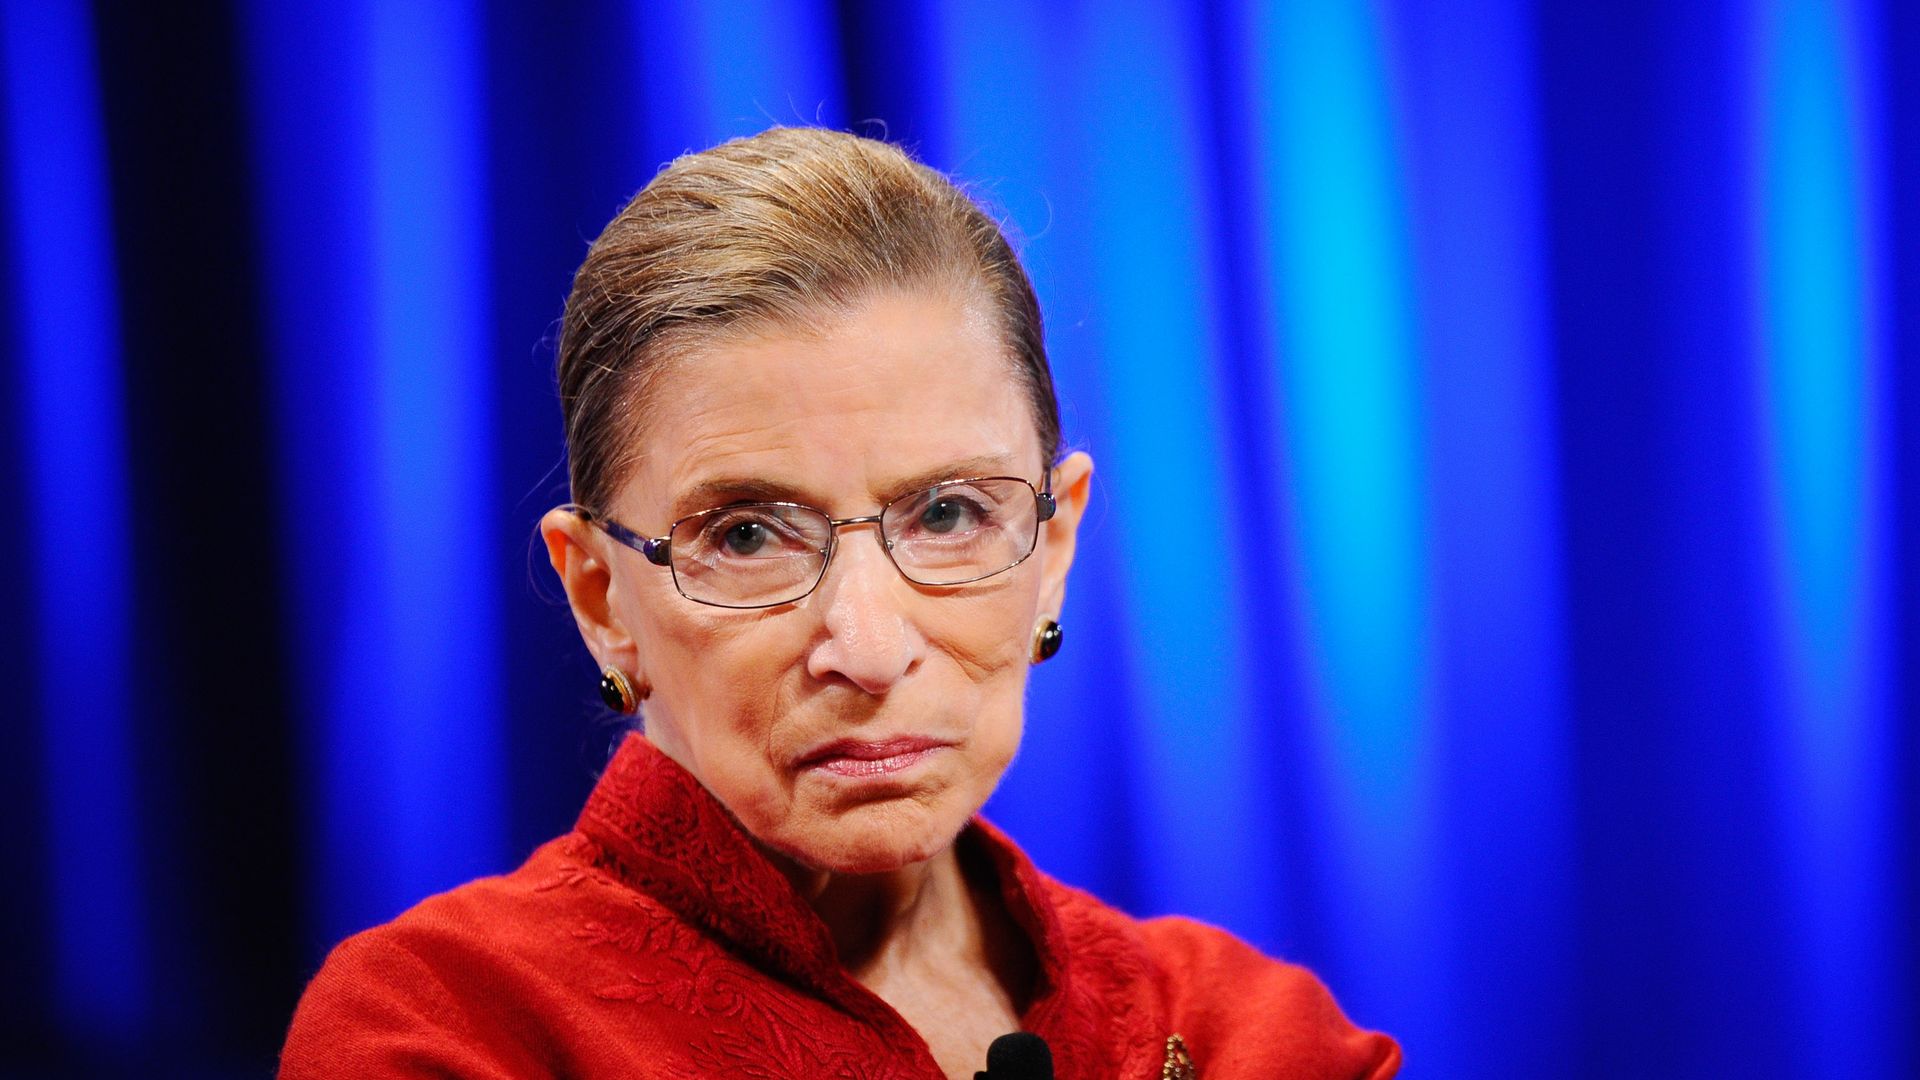 A photo of the late Supreme Court Justice Ruth Bader Ginsburg 